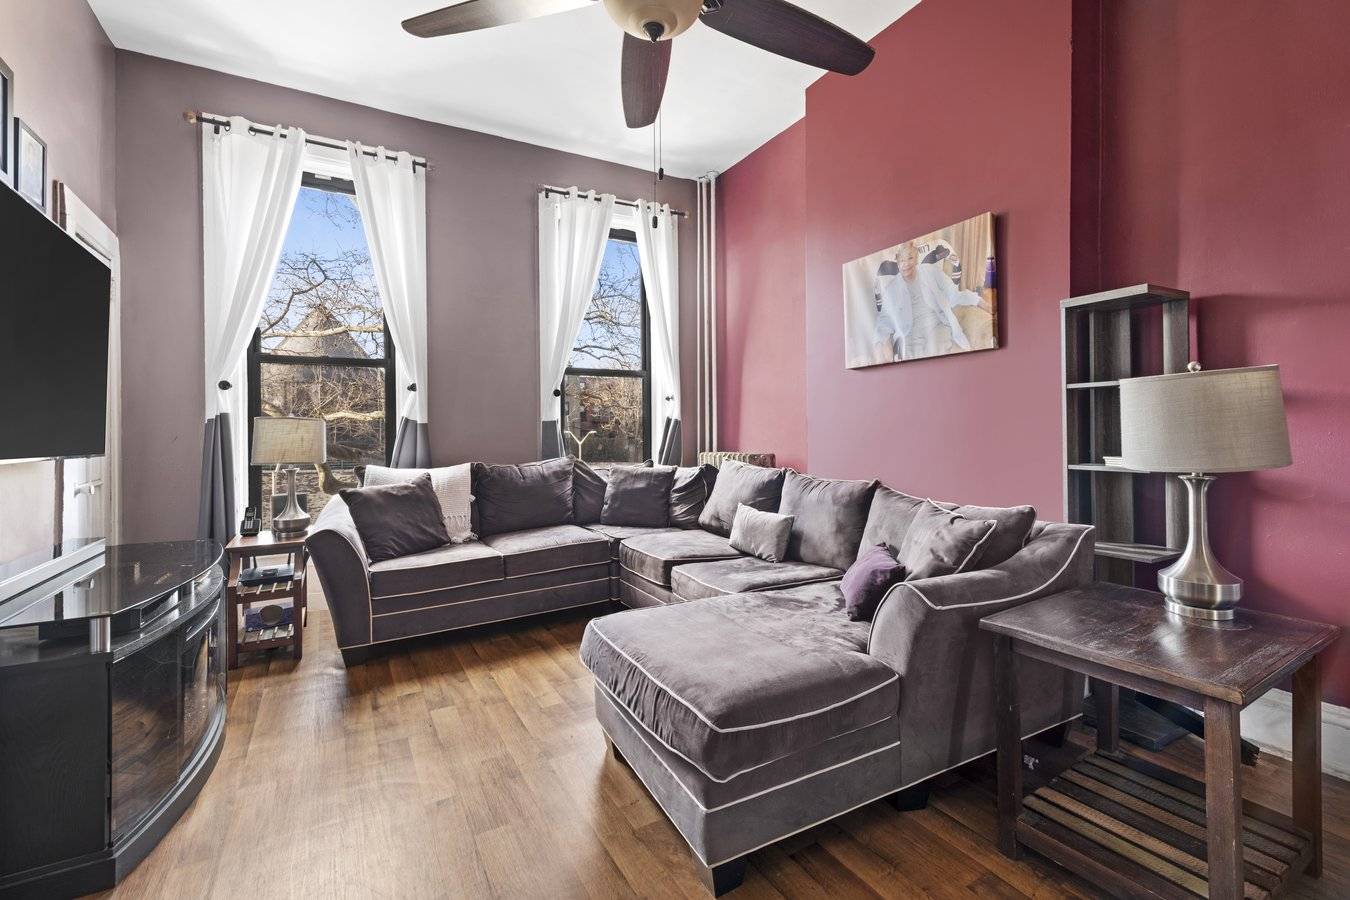 A investors dream in prime South Slope a brick, sunlit, legal three family home, loaded with prewar details and a massive backyard, located just 5 blocks from Prospect Park and ...